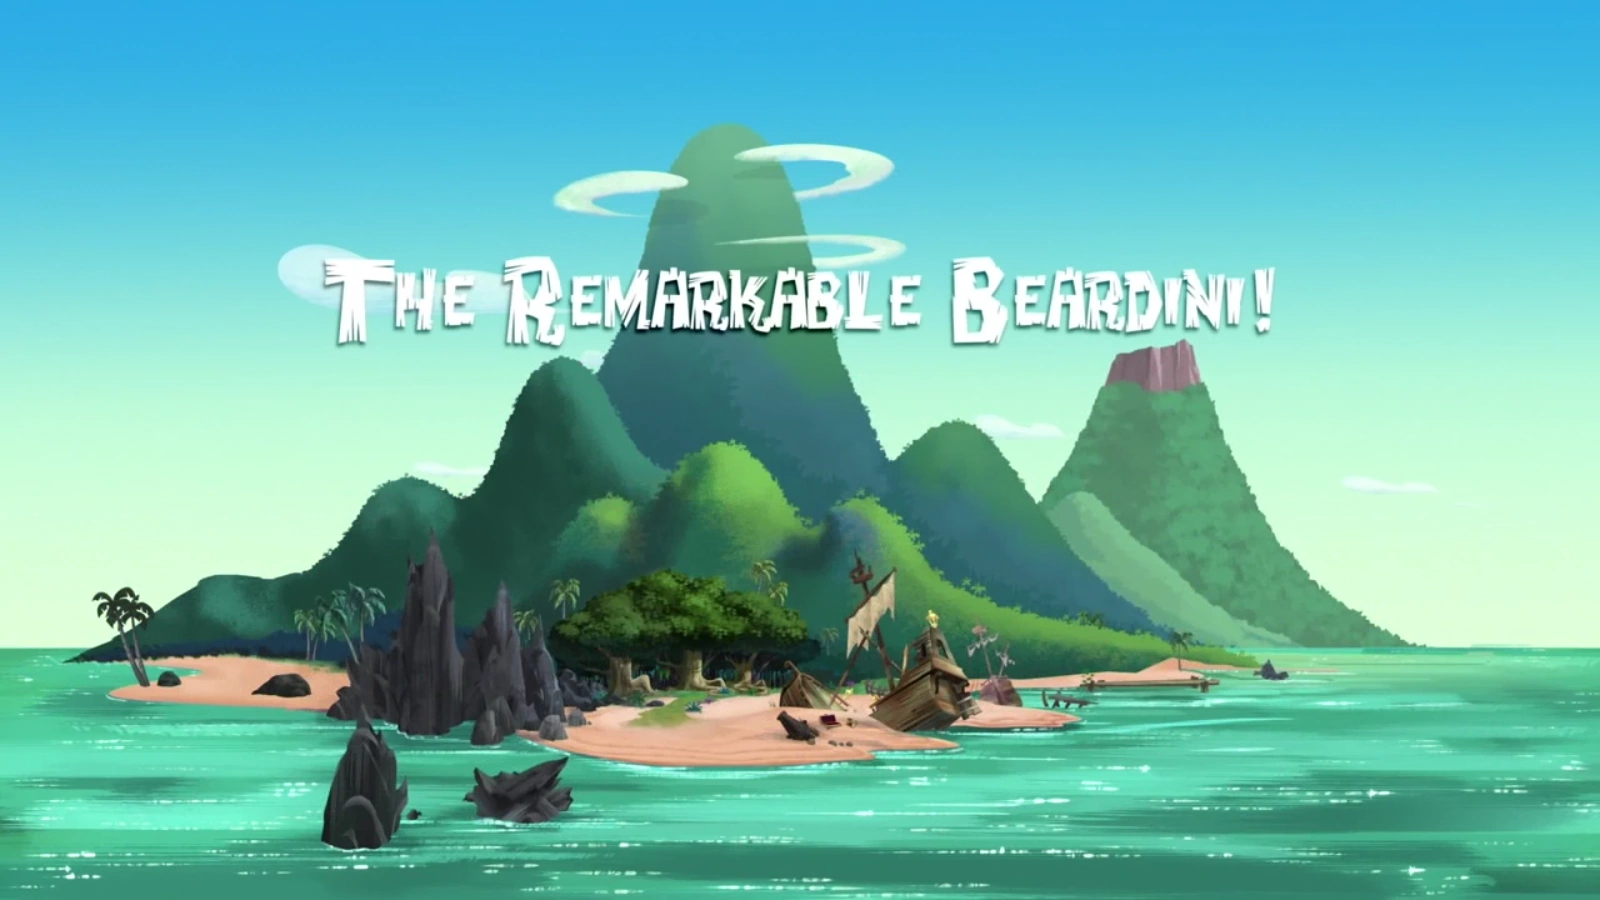 The Remarkable Beardini! | Jake and the Never Land Pirates Wiki | Fandom